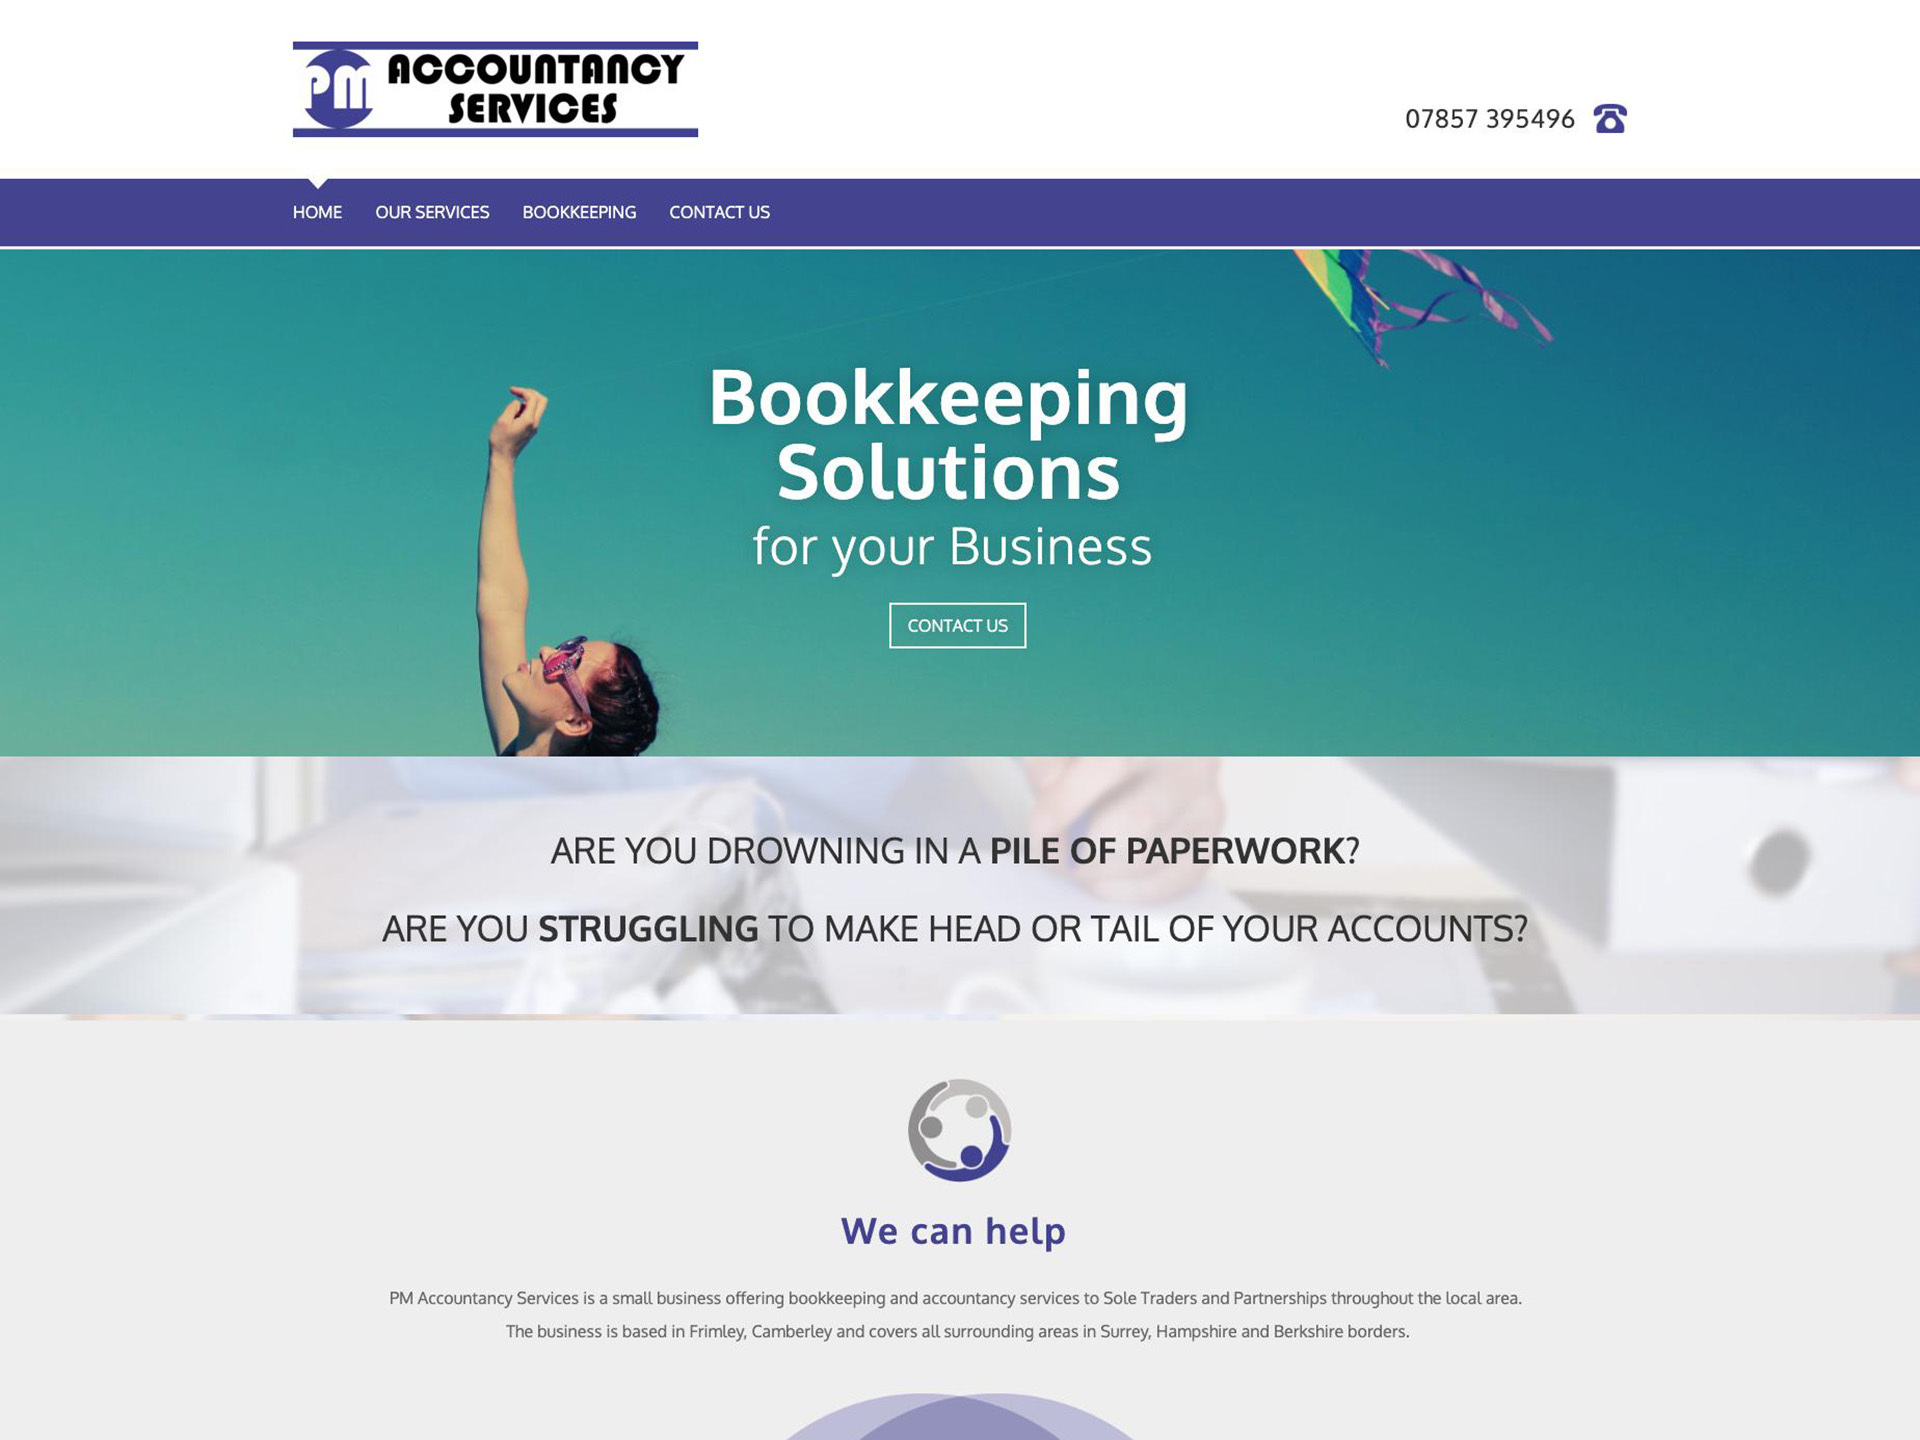 PM Accountancy Services website